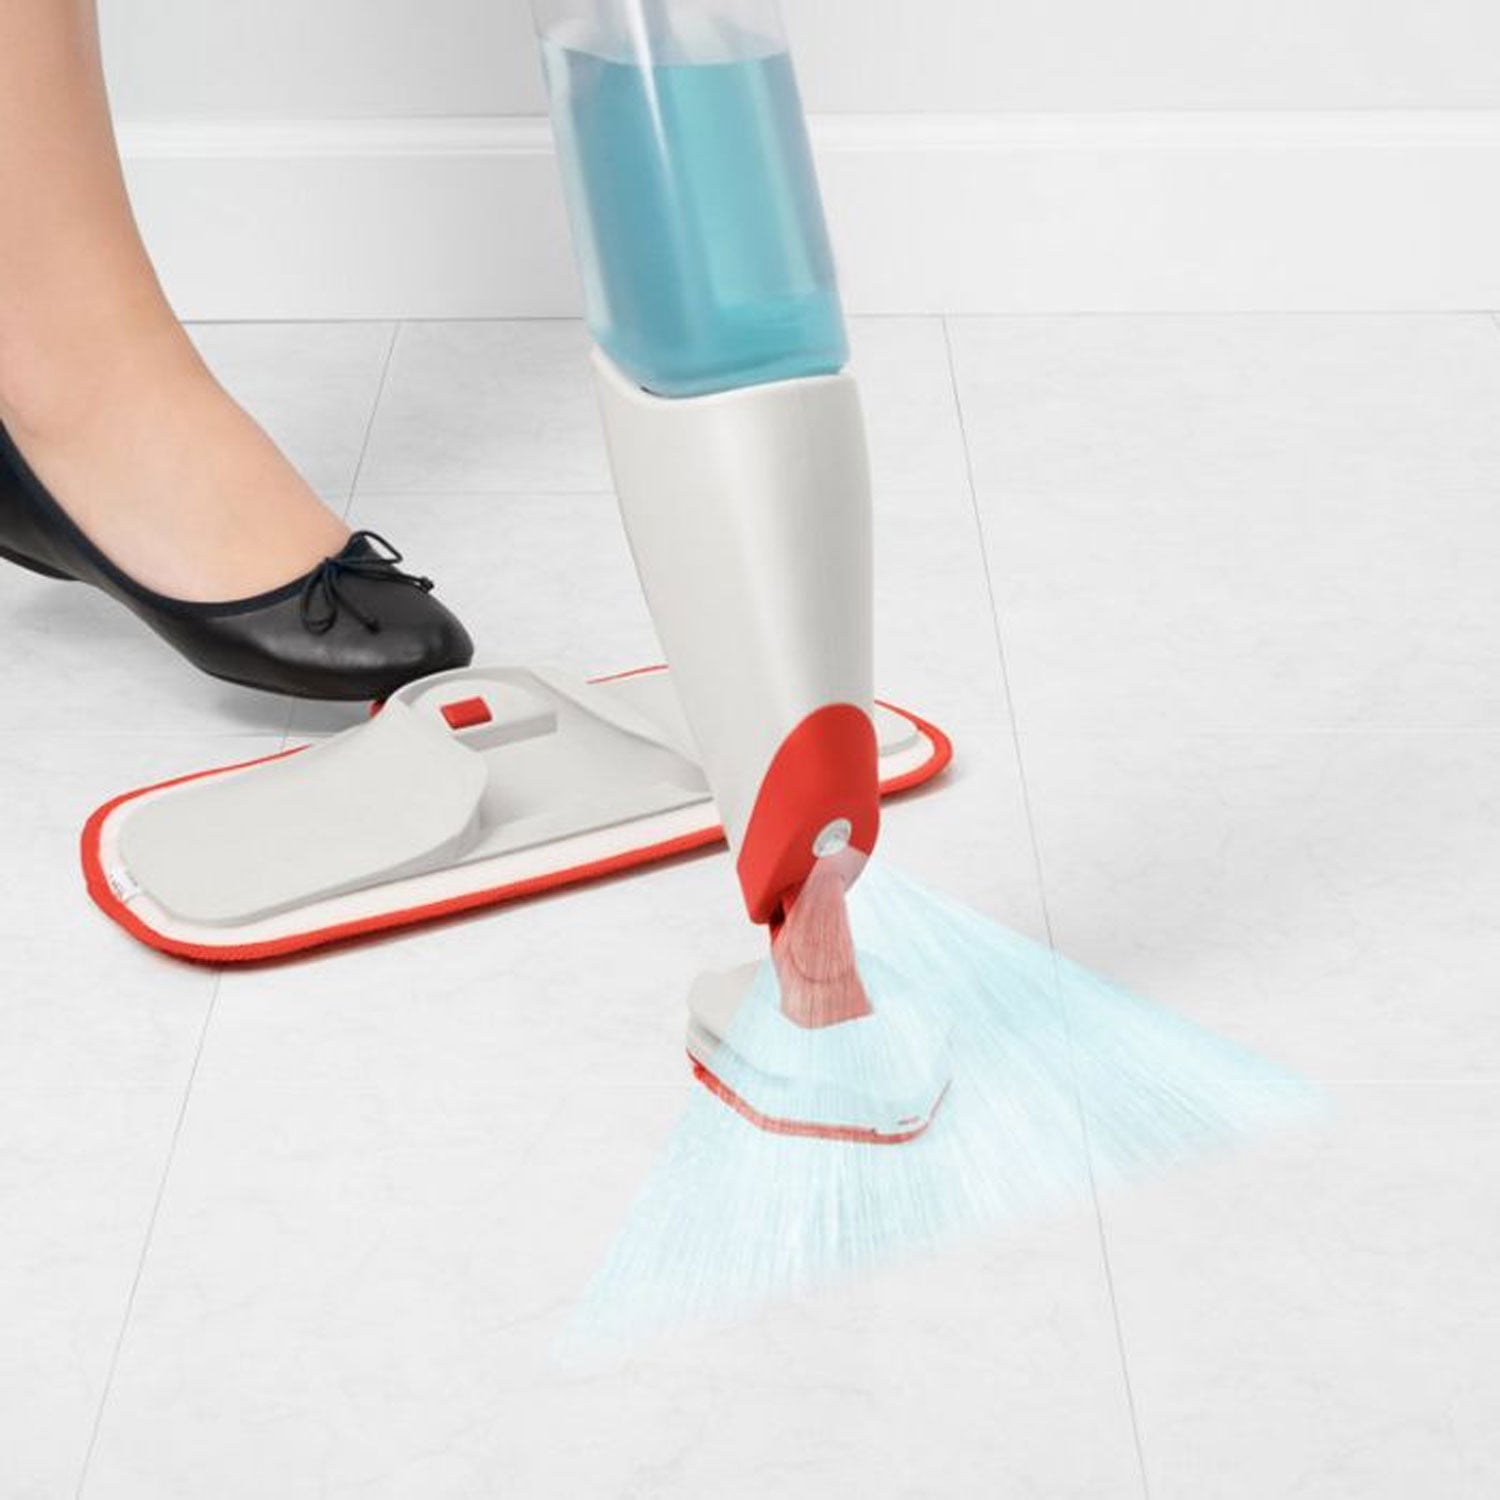 The Chicago Athenaeum - OXO Microfiber Spray Mop with Slide-out Scrubber  2013-2016